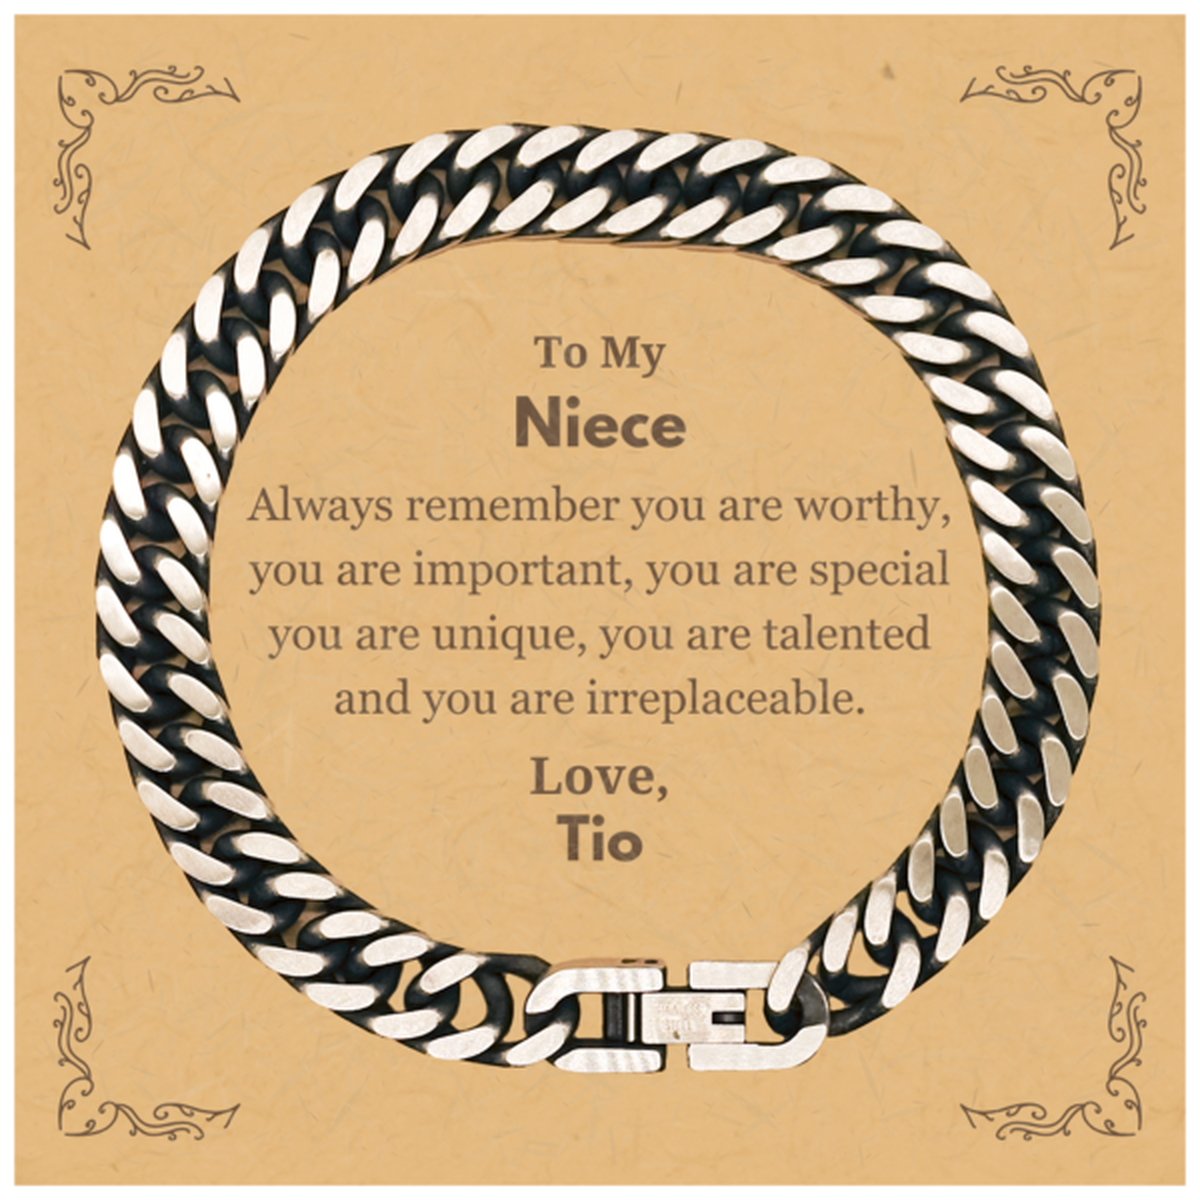 Niece Birthday Gifts from Tio, Inspirational Cuban Link Chain Bracelet for Niece Christmas Graduation Gifts for Niece Always remember you are worthy, you are important. Love, Tio